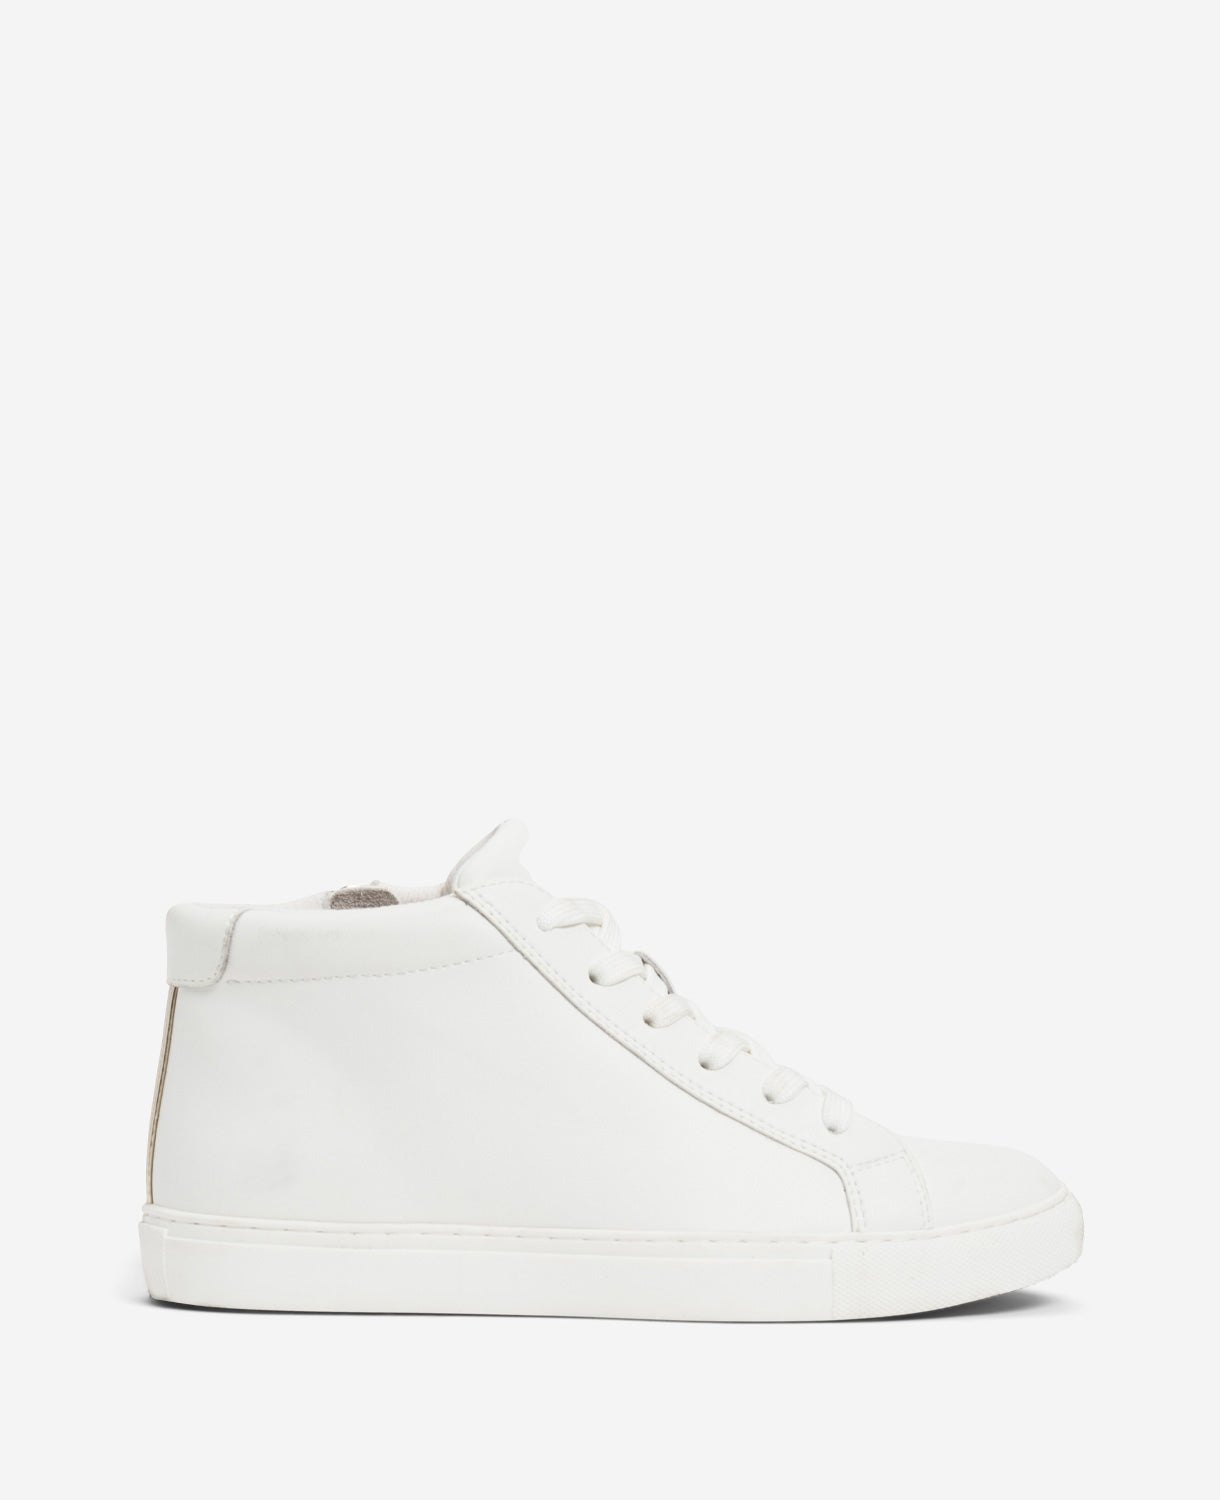 KENNETH COLE LEATHER HIGH TOP KAM SNEAKER